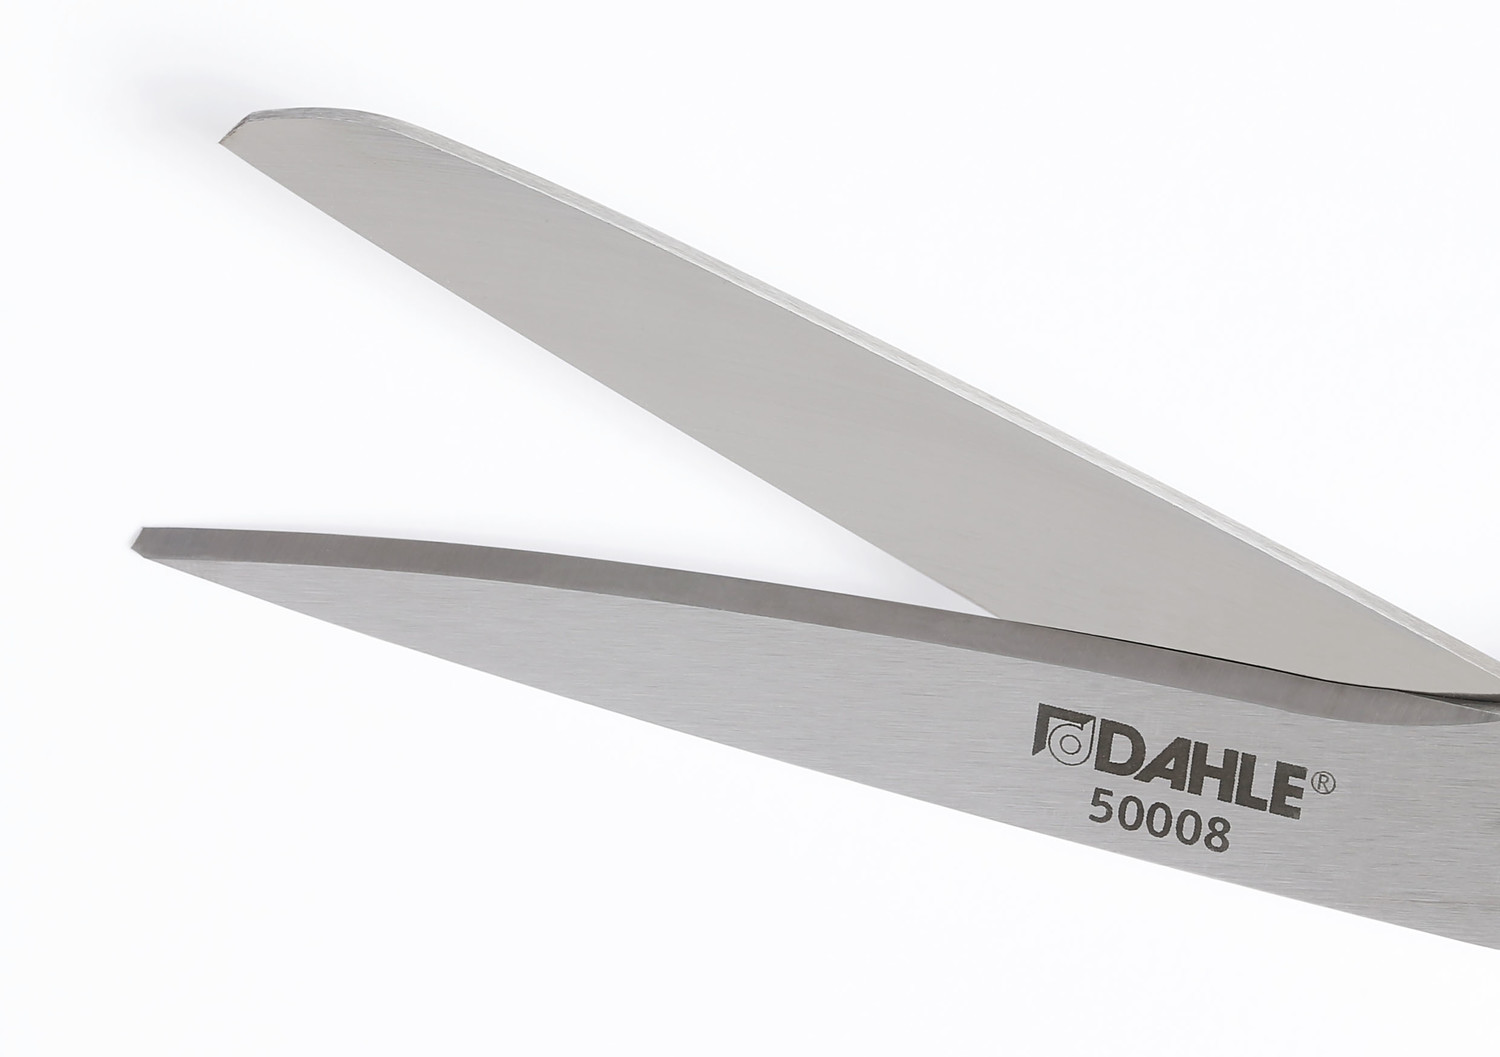 Resharpenable scissor blades for perfect, constant cutting results